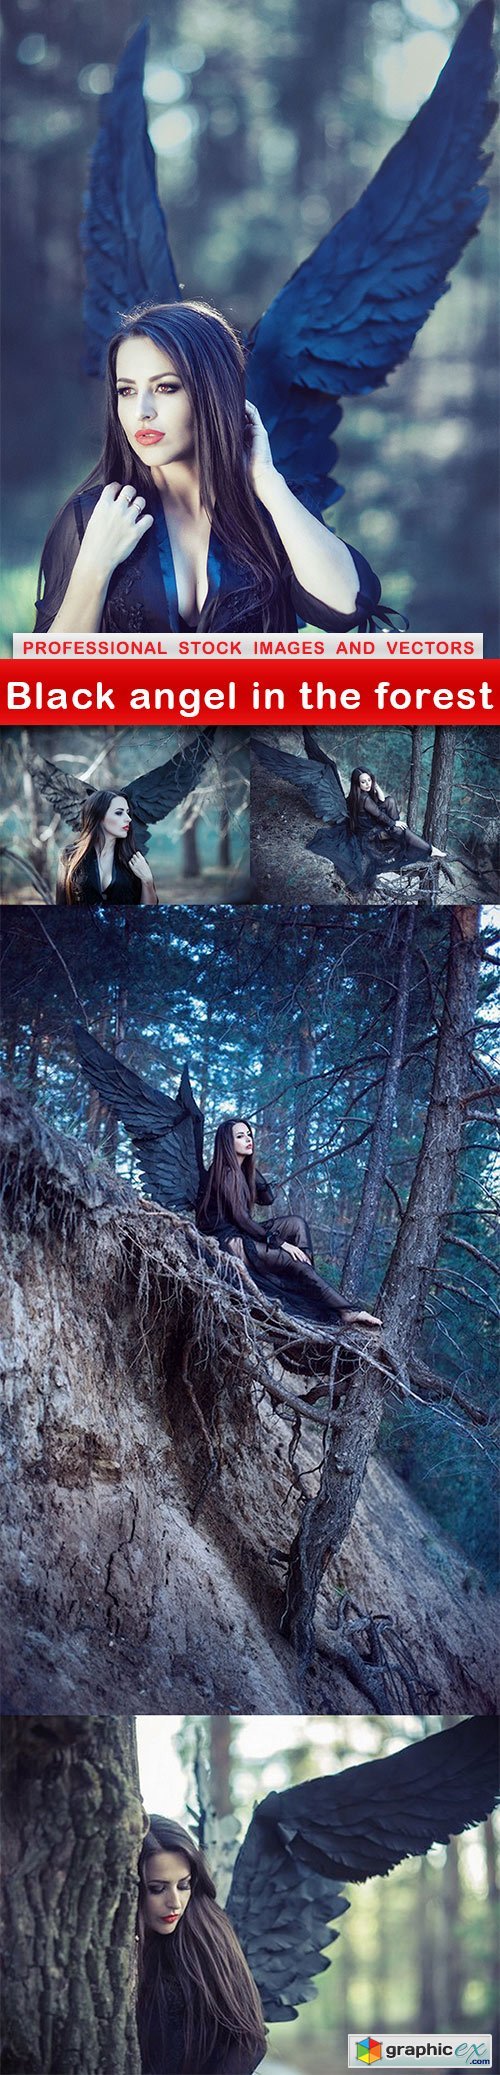 Black angel in the forest - 5 UHQ JPEG